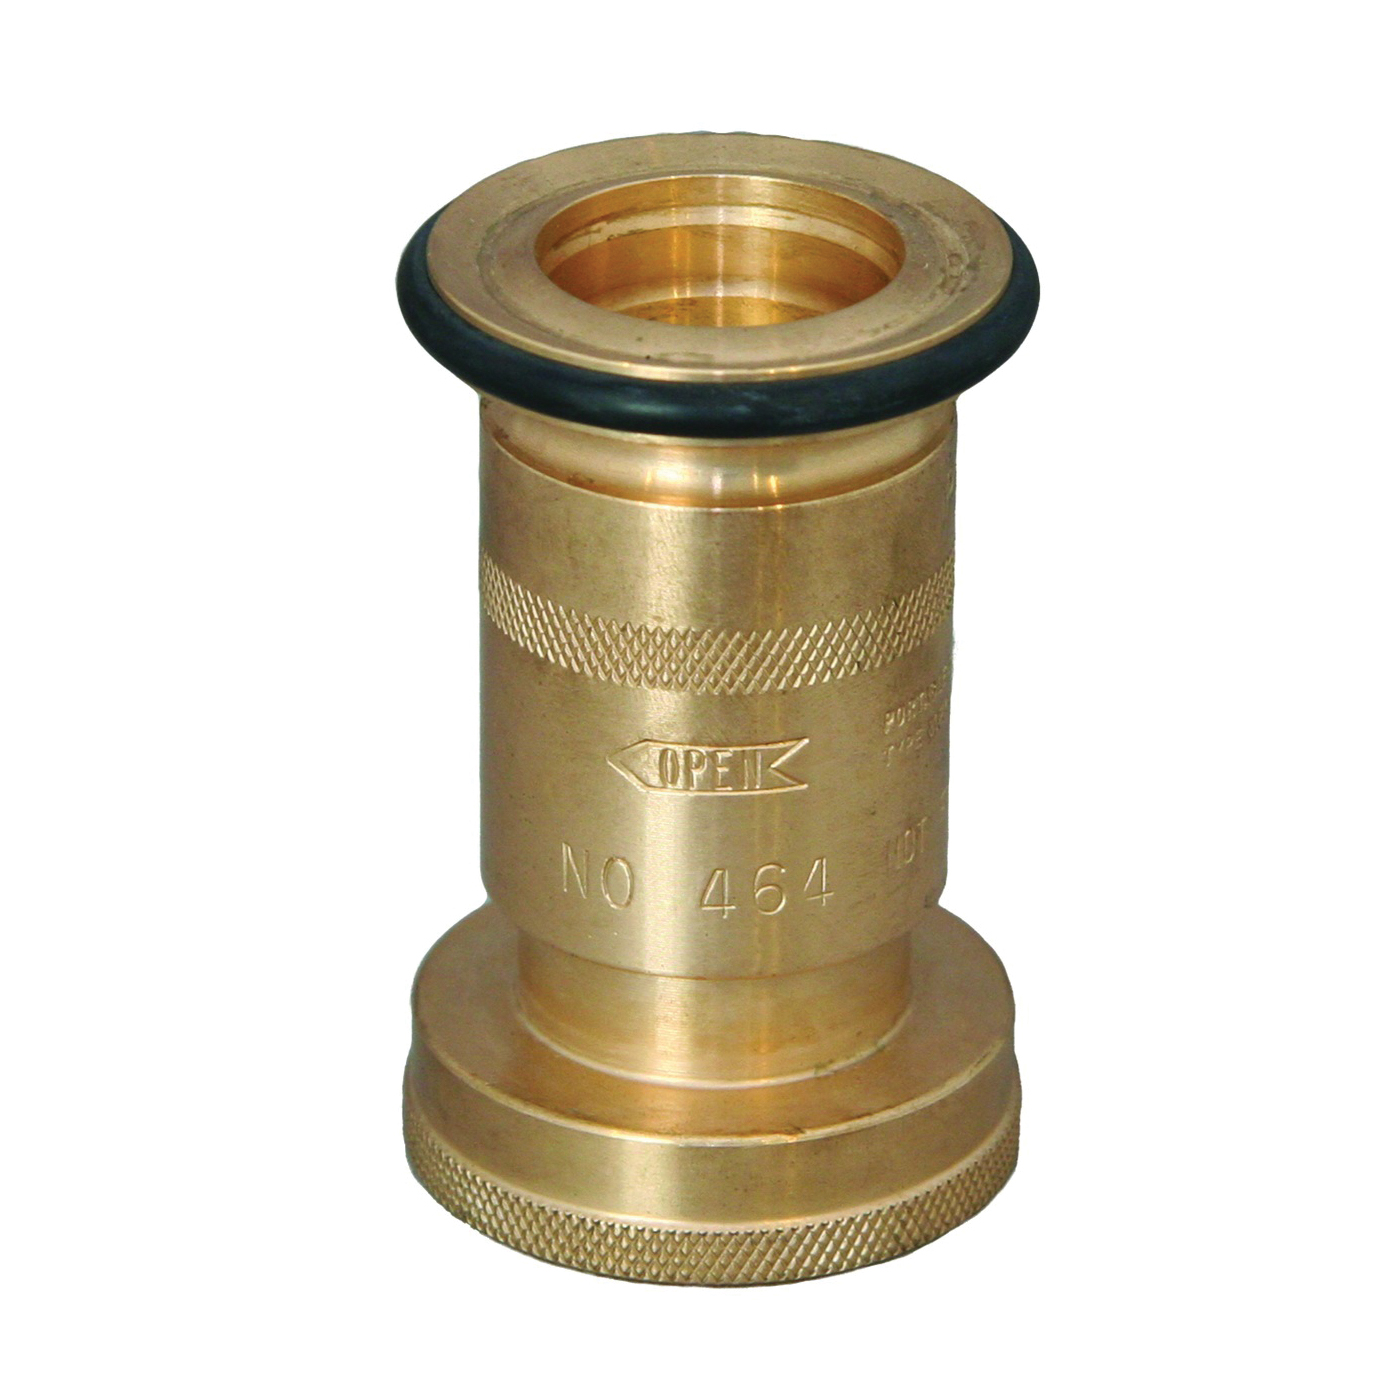 JAHN-150-NST Nozzle, 1-1/2 in, NST, Thermoplastic Rubber, Brass